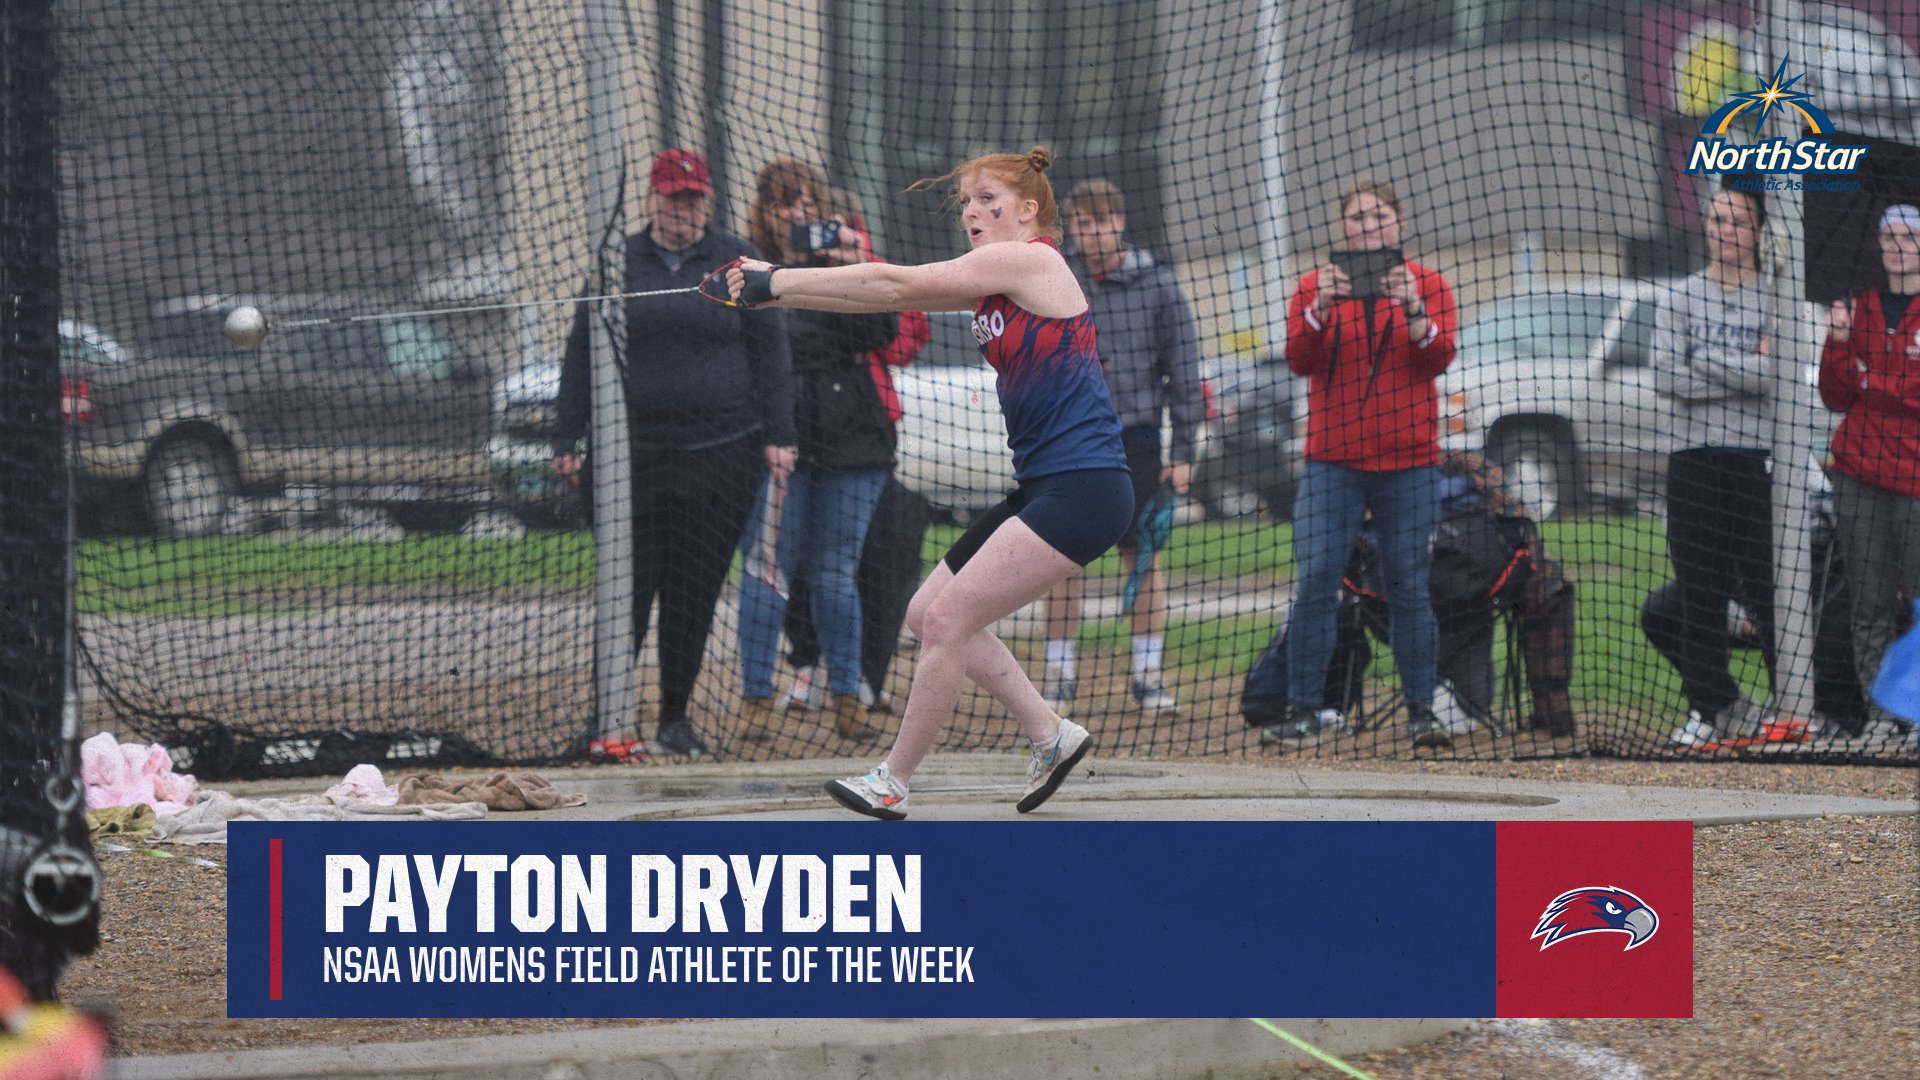 Dryden Named NSAA Athlete of the Week